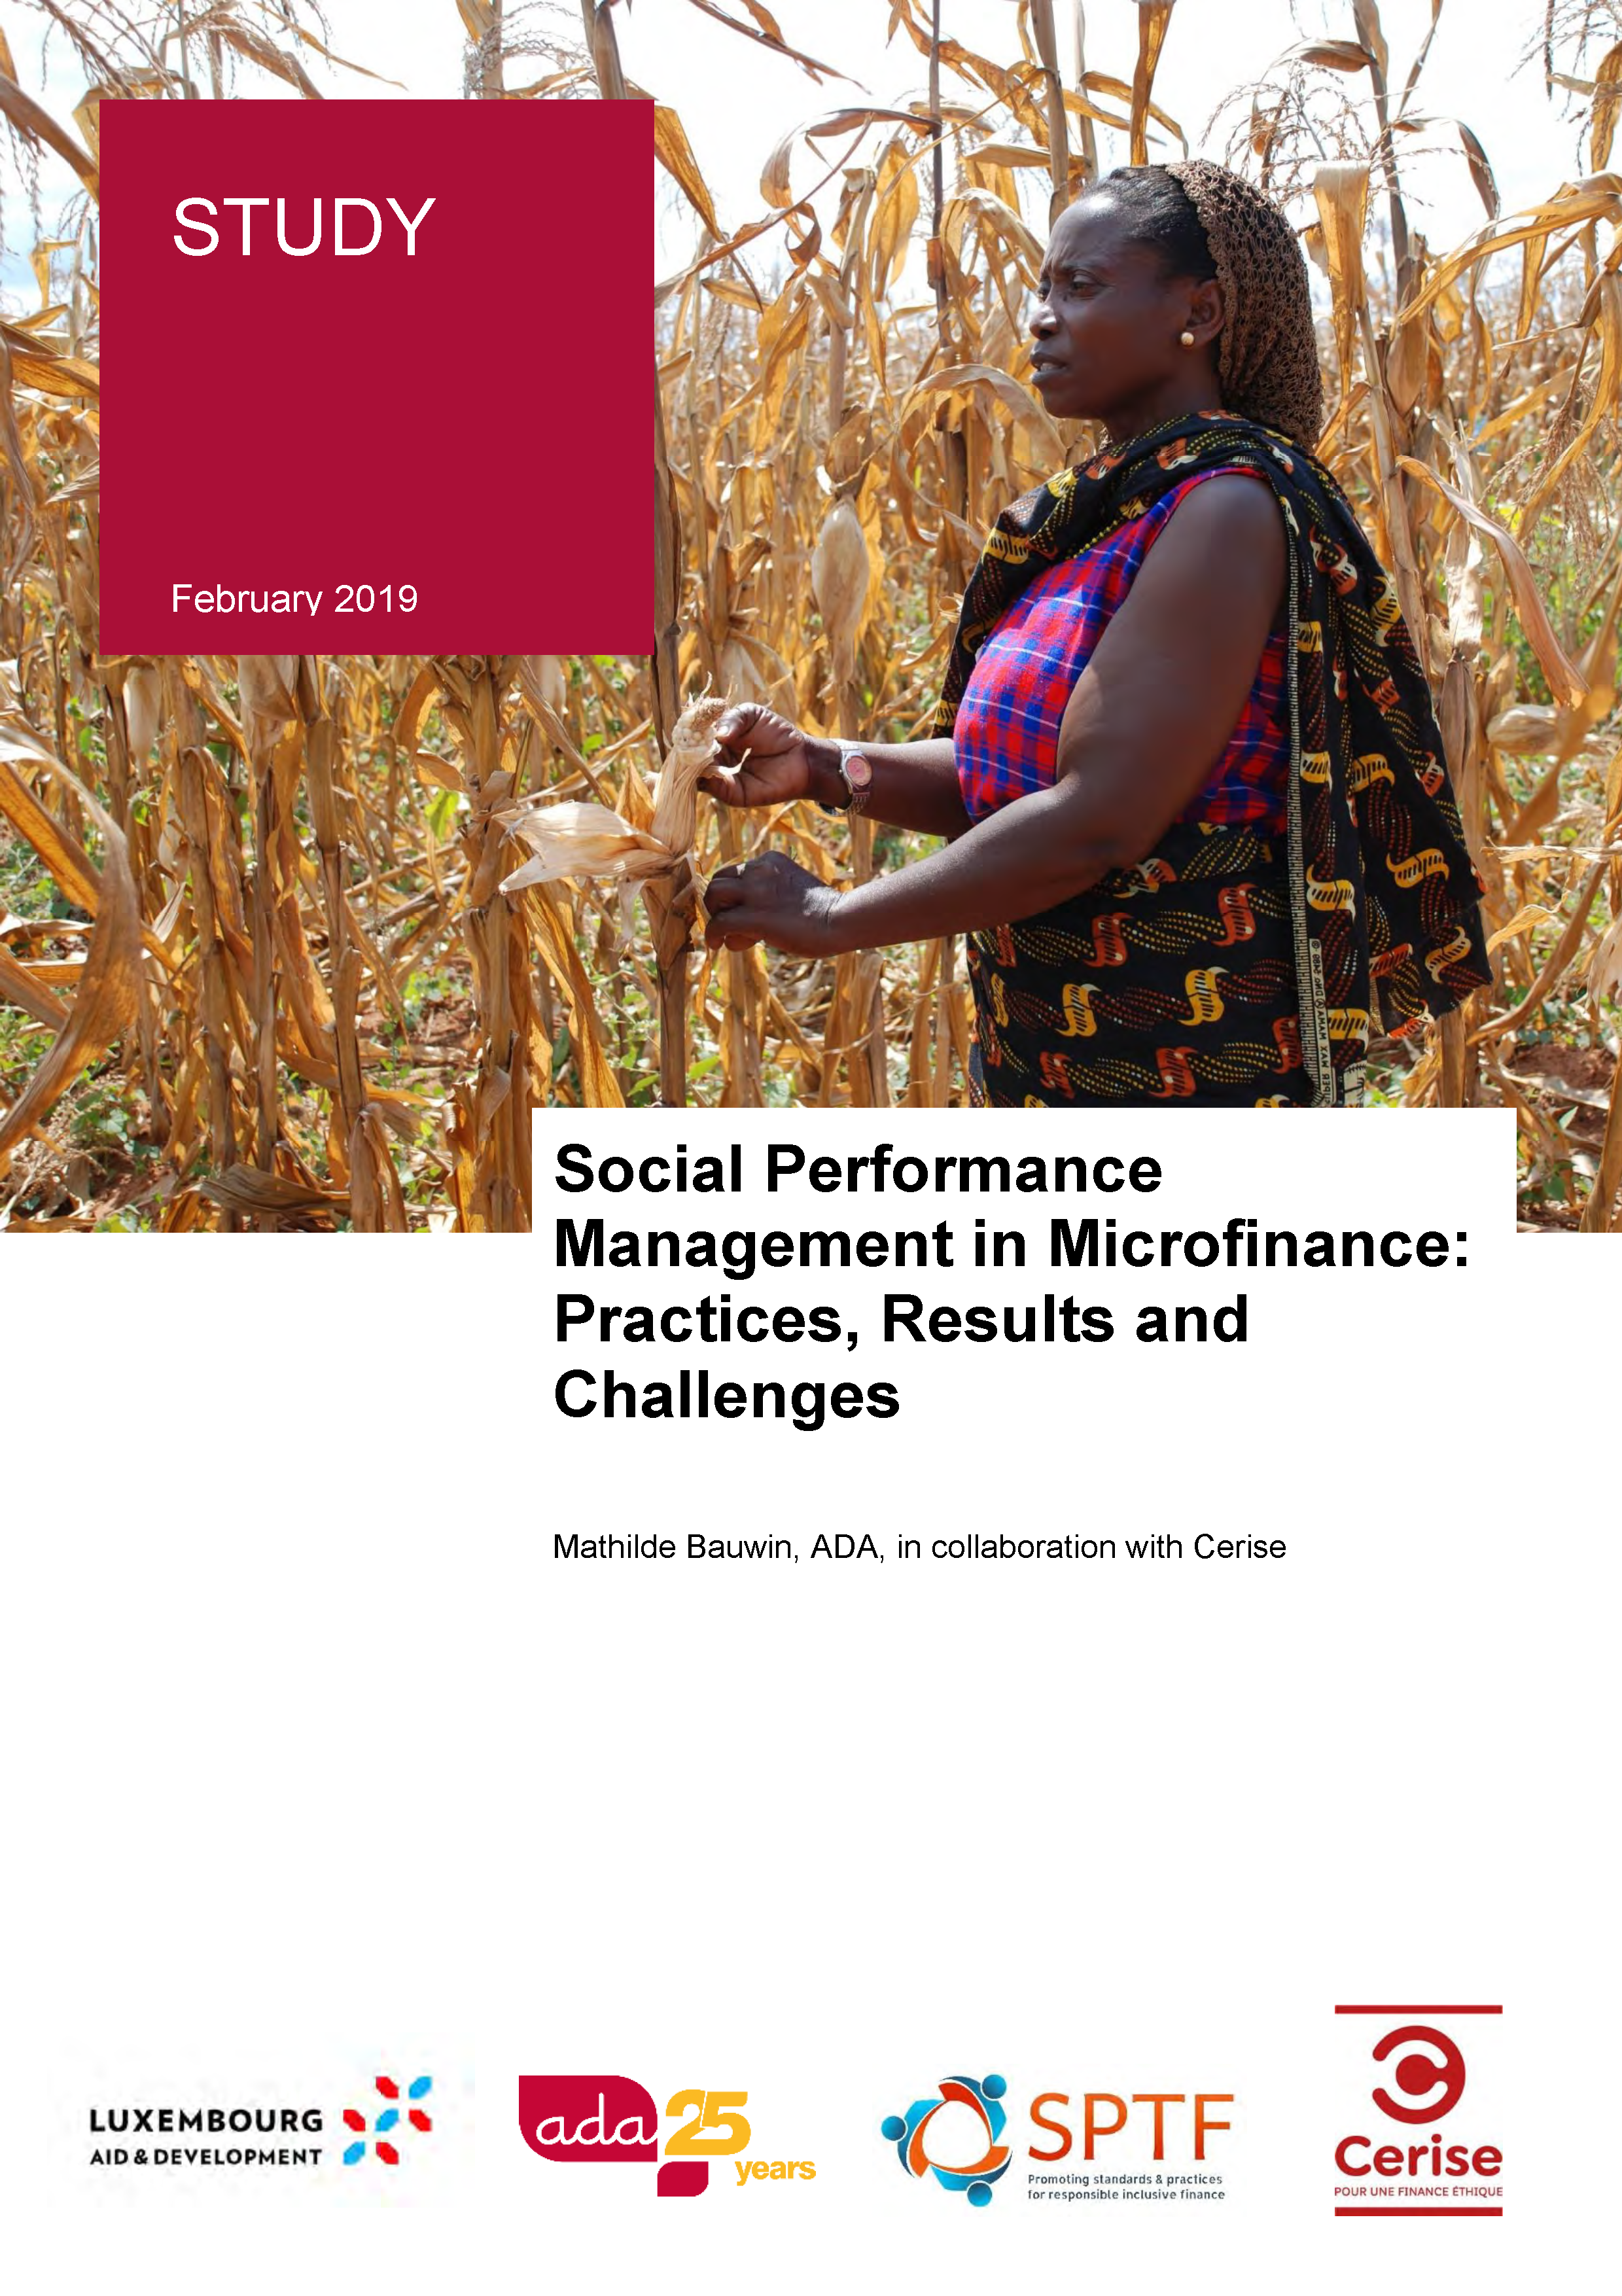 Cover of study on social performance management in microfinance